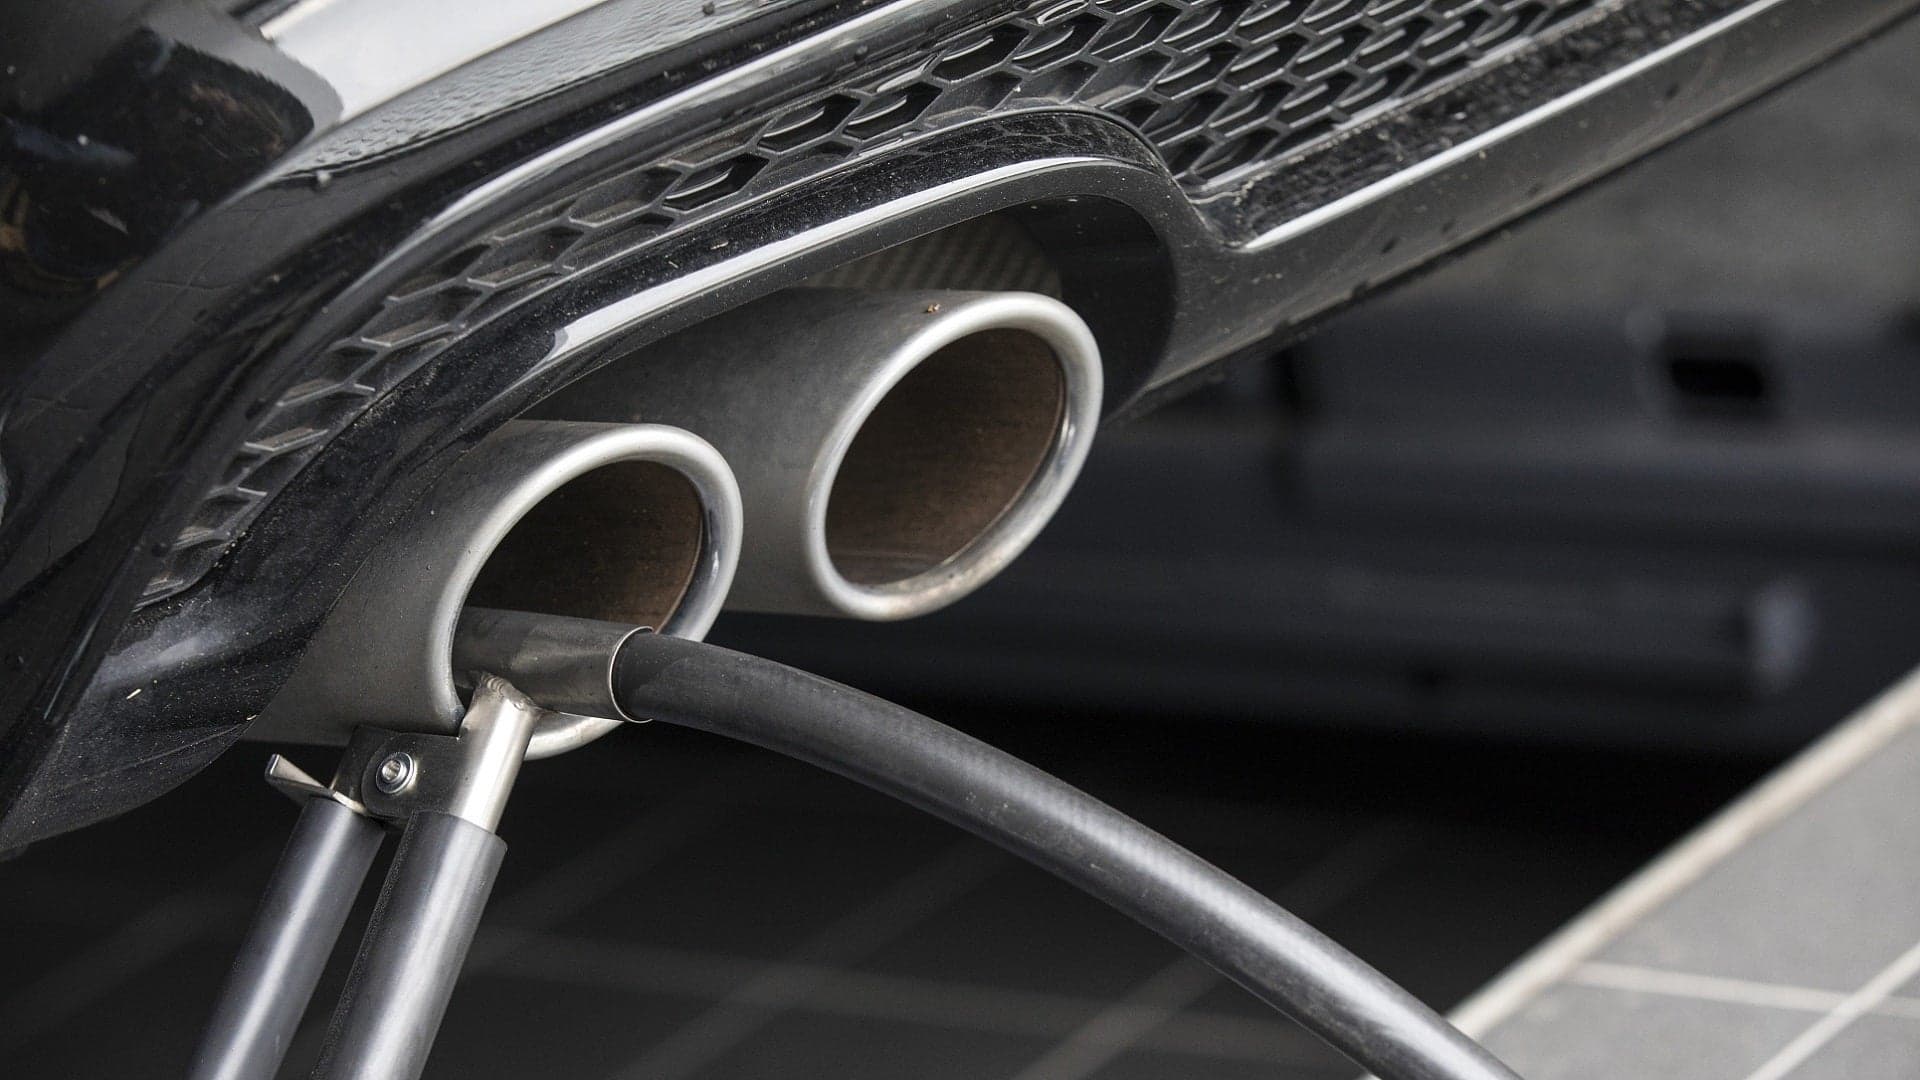 BMW, Daimler, and Volkswagen Formally Accused of Years-Long Emissions Collusion by EU